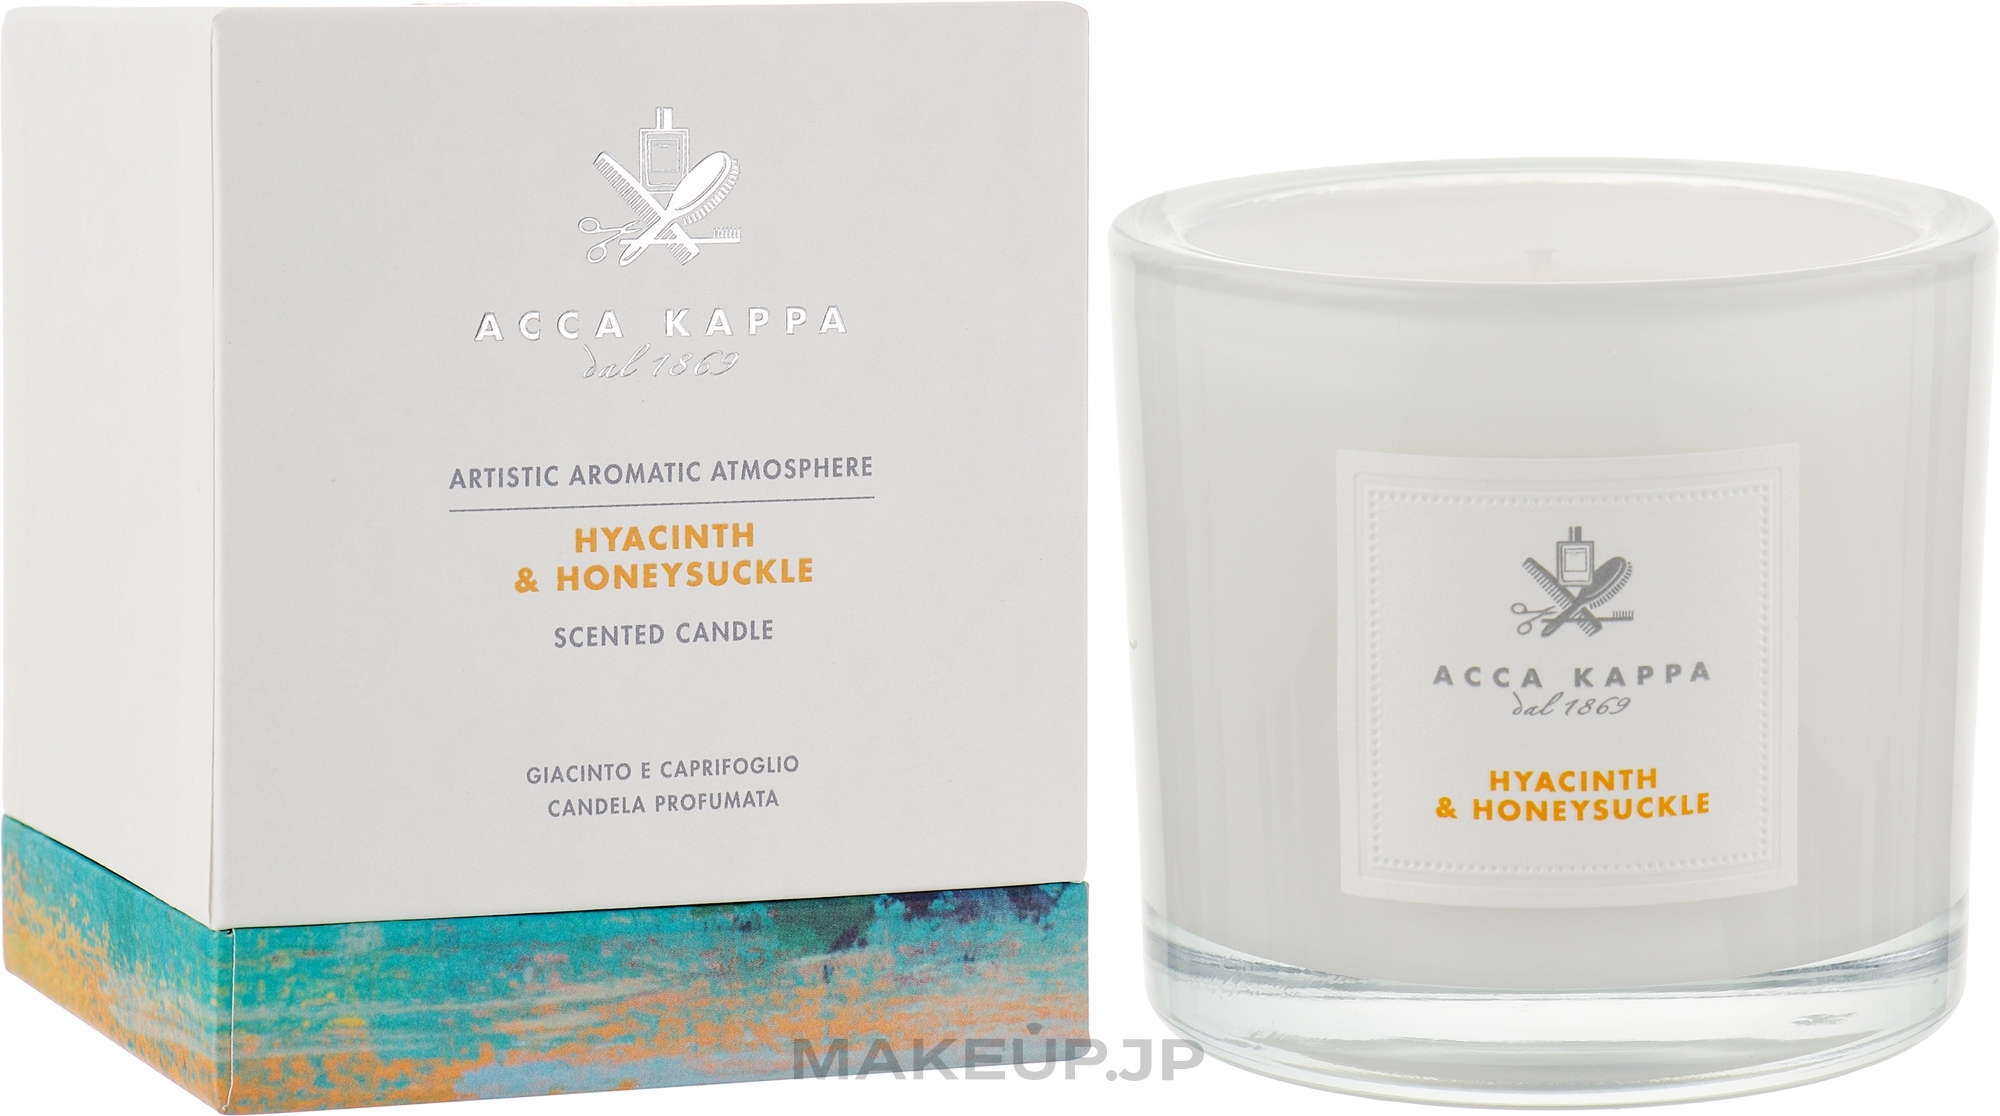 Hyacinth & Honeysuckle Scented Candle - Acca Kappa Hyacinth & Honeysuckle Scented Candle — photo 180 g